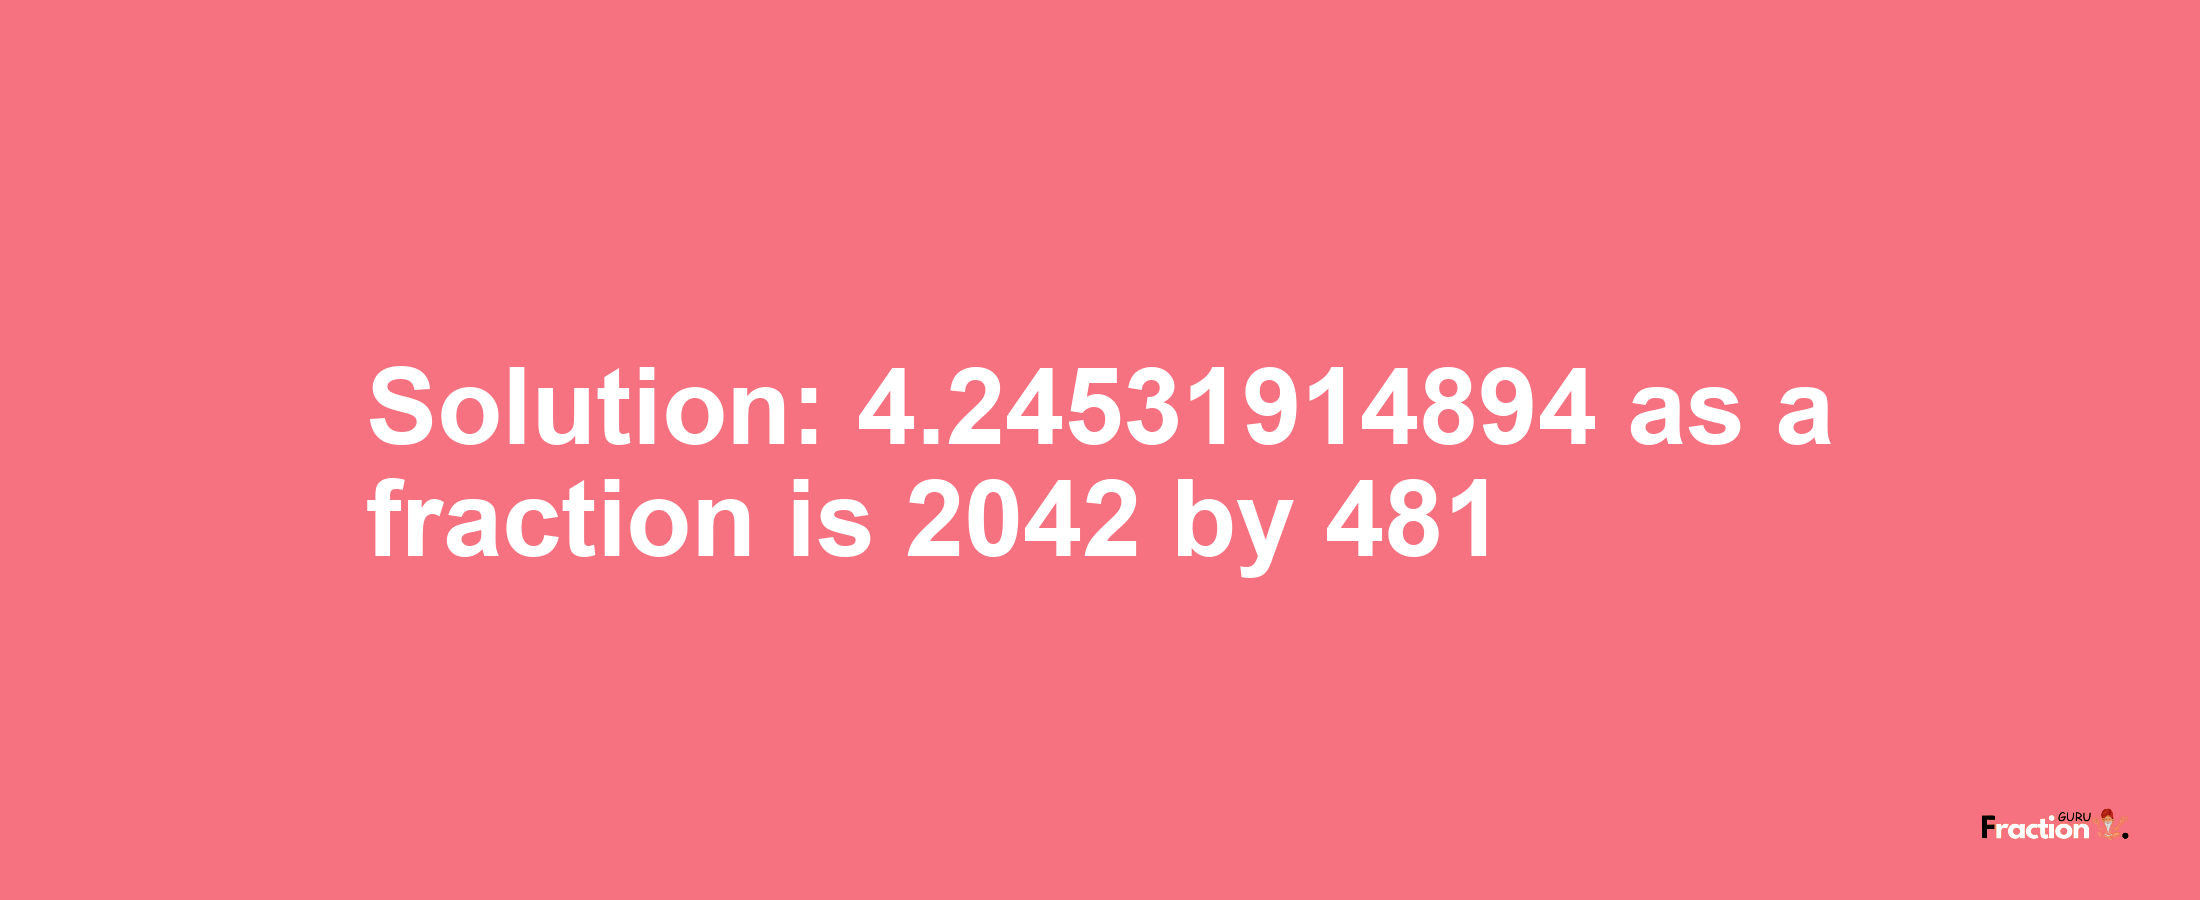 Solution:4.24531914894 as a fraction is 2042/481